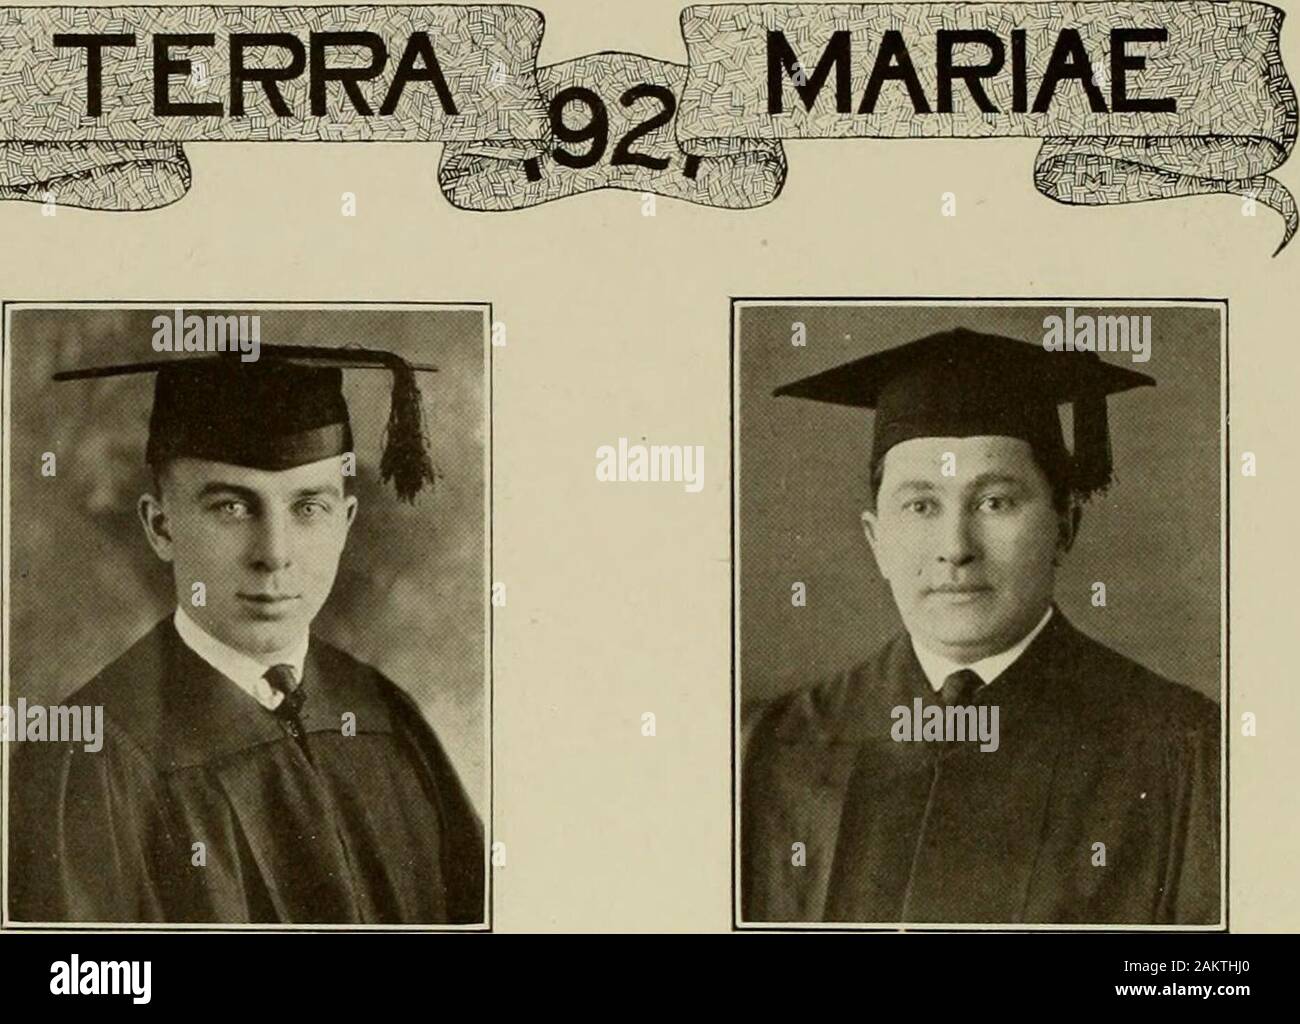 Terra Mariae . LEONARD H. THAWLEYChemistry 2 T A X the fall of 1917 there came to us. from the famous city of ^ns Laurel a little fellow with the SS^i niost wonderful hlue eyes you ever saw. In the course of these last threeyears his life has been filled withmuch happiness, if one may judgefrom his ever-pleasant countenance.-Surely, he has had his troubles anrltrials, but his spirit has never failedhim. His affairs of the heart havebeen both numerous and successfuland now. since his noble cohort. Abe.has left us. he has attained the pres-idency of the Lovers Club. His Sniles have won him manys Stock Photo